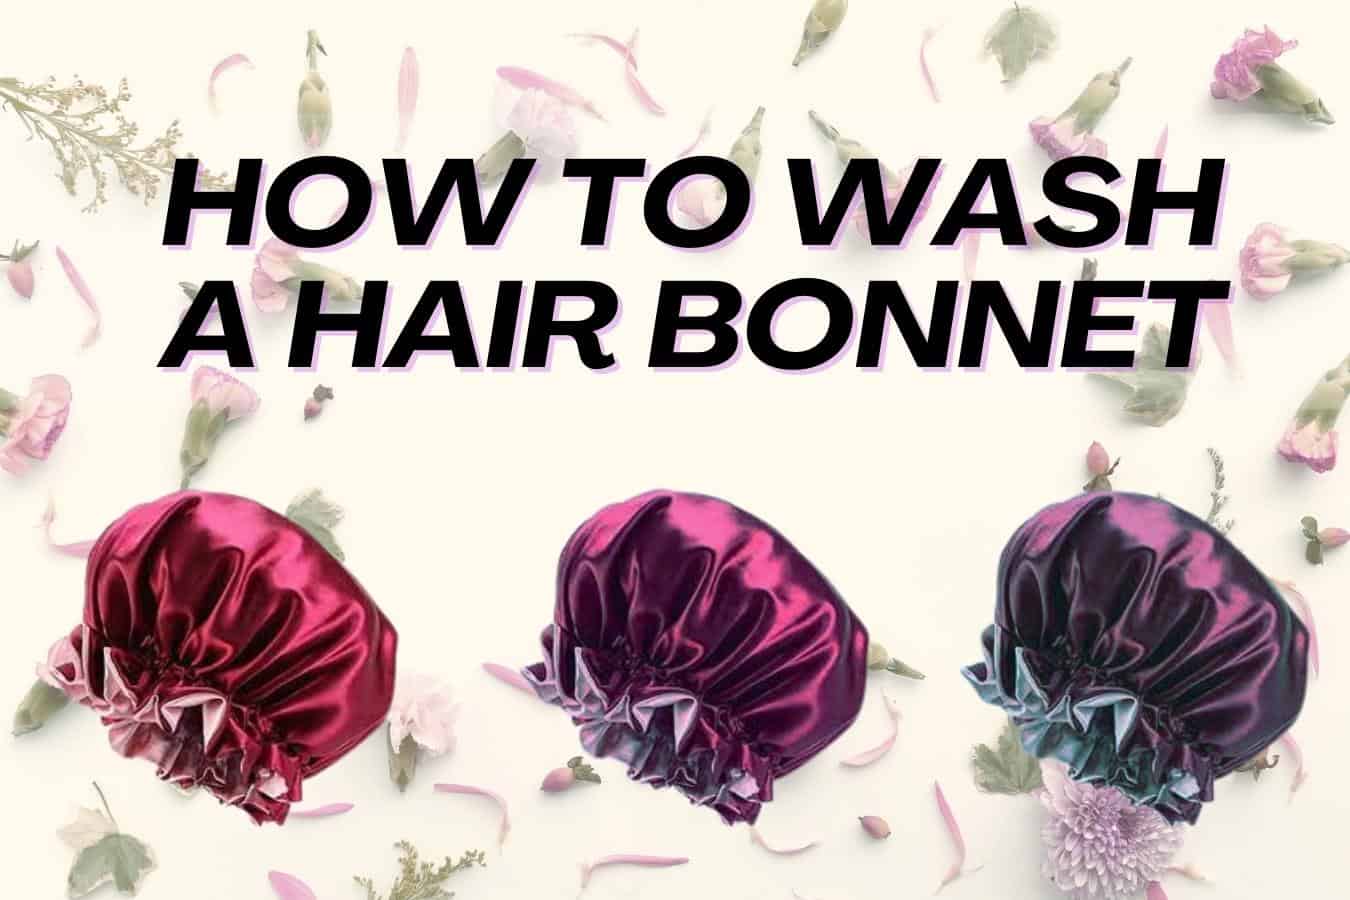 How To wash hair bonnet